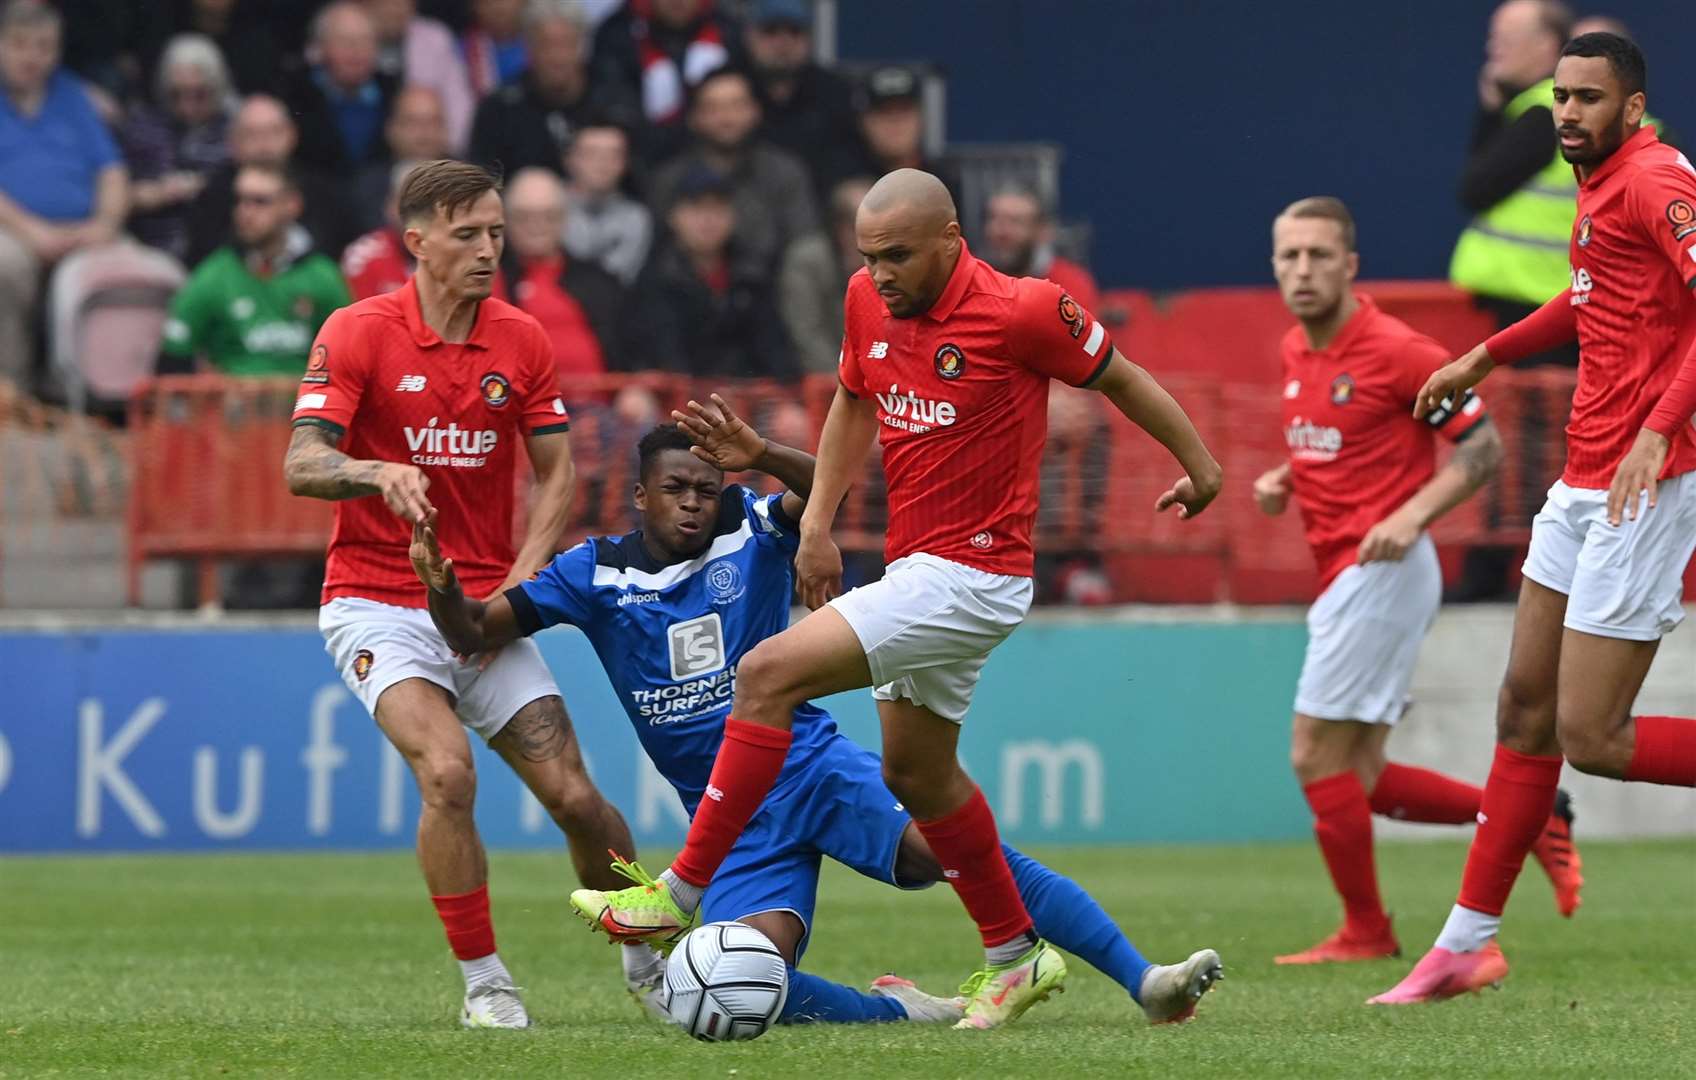 Elliott Romain playing for Ebbsfleet United in the play-offs Picture: Keith Gillard